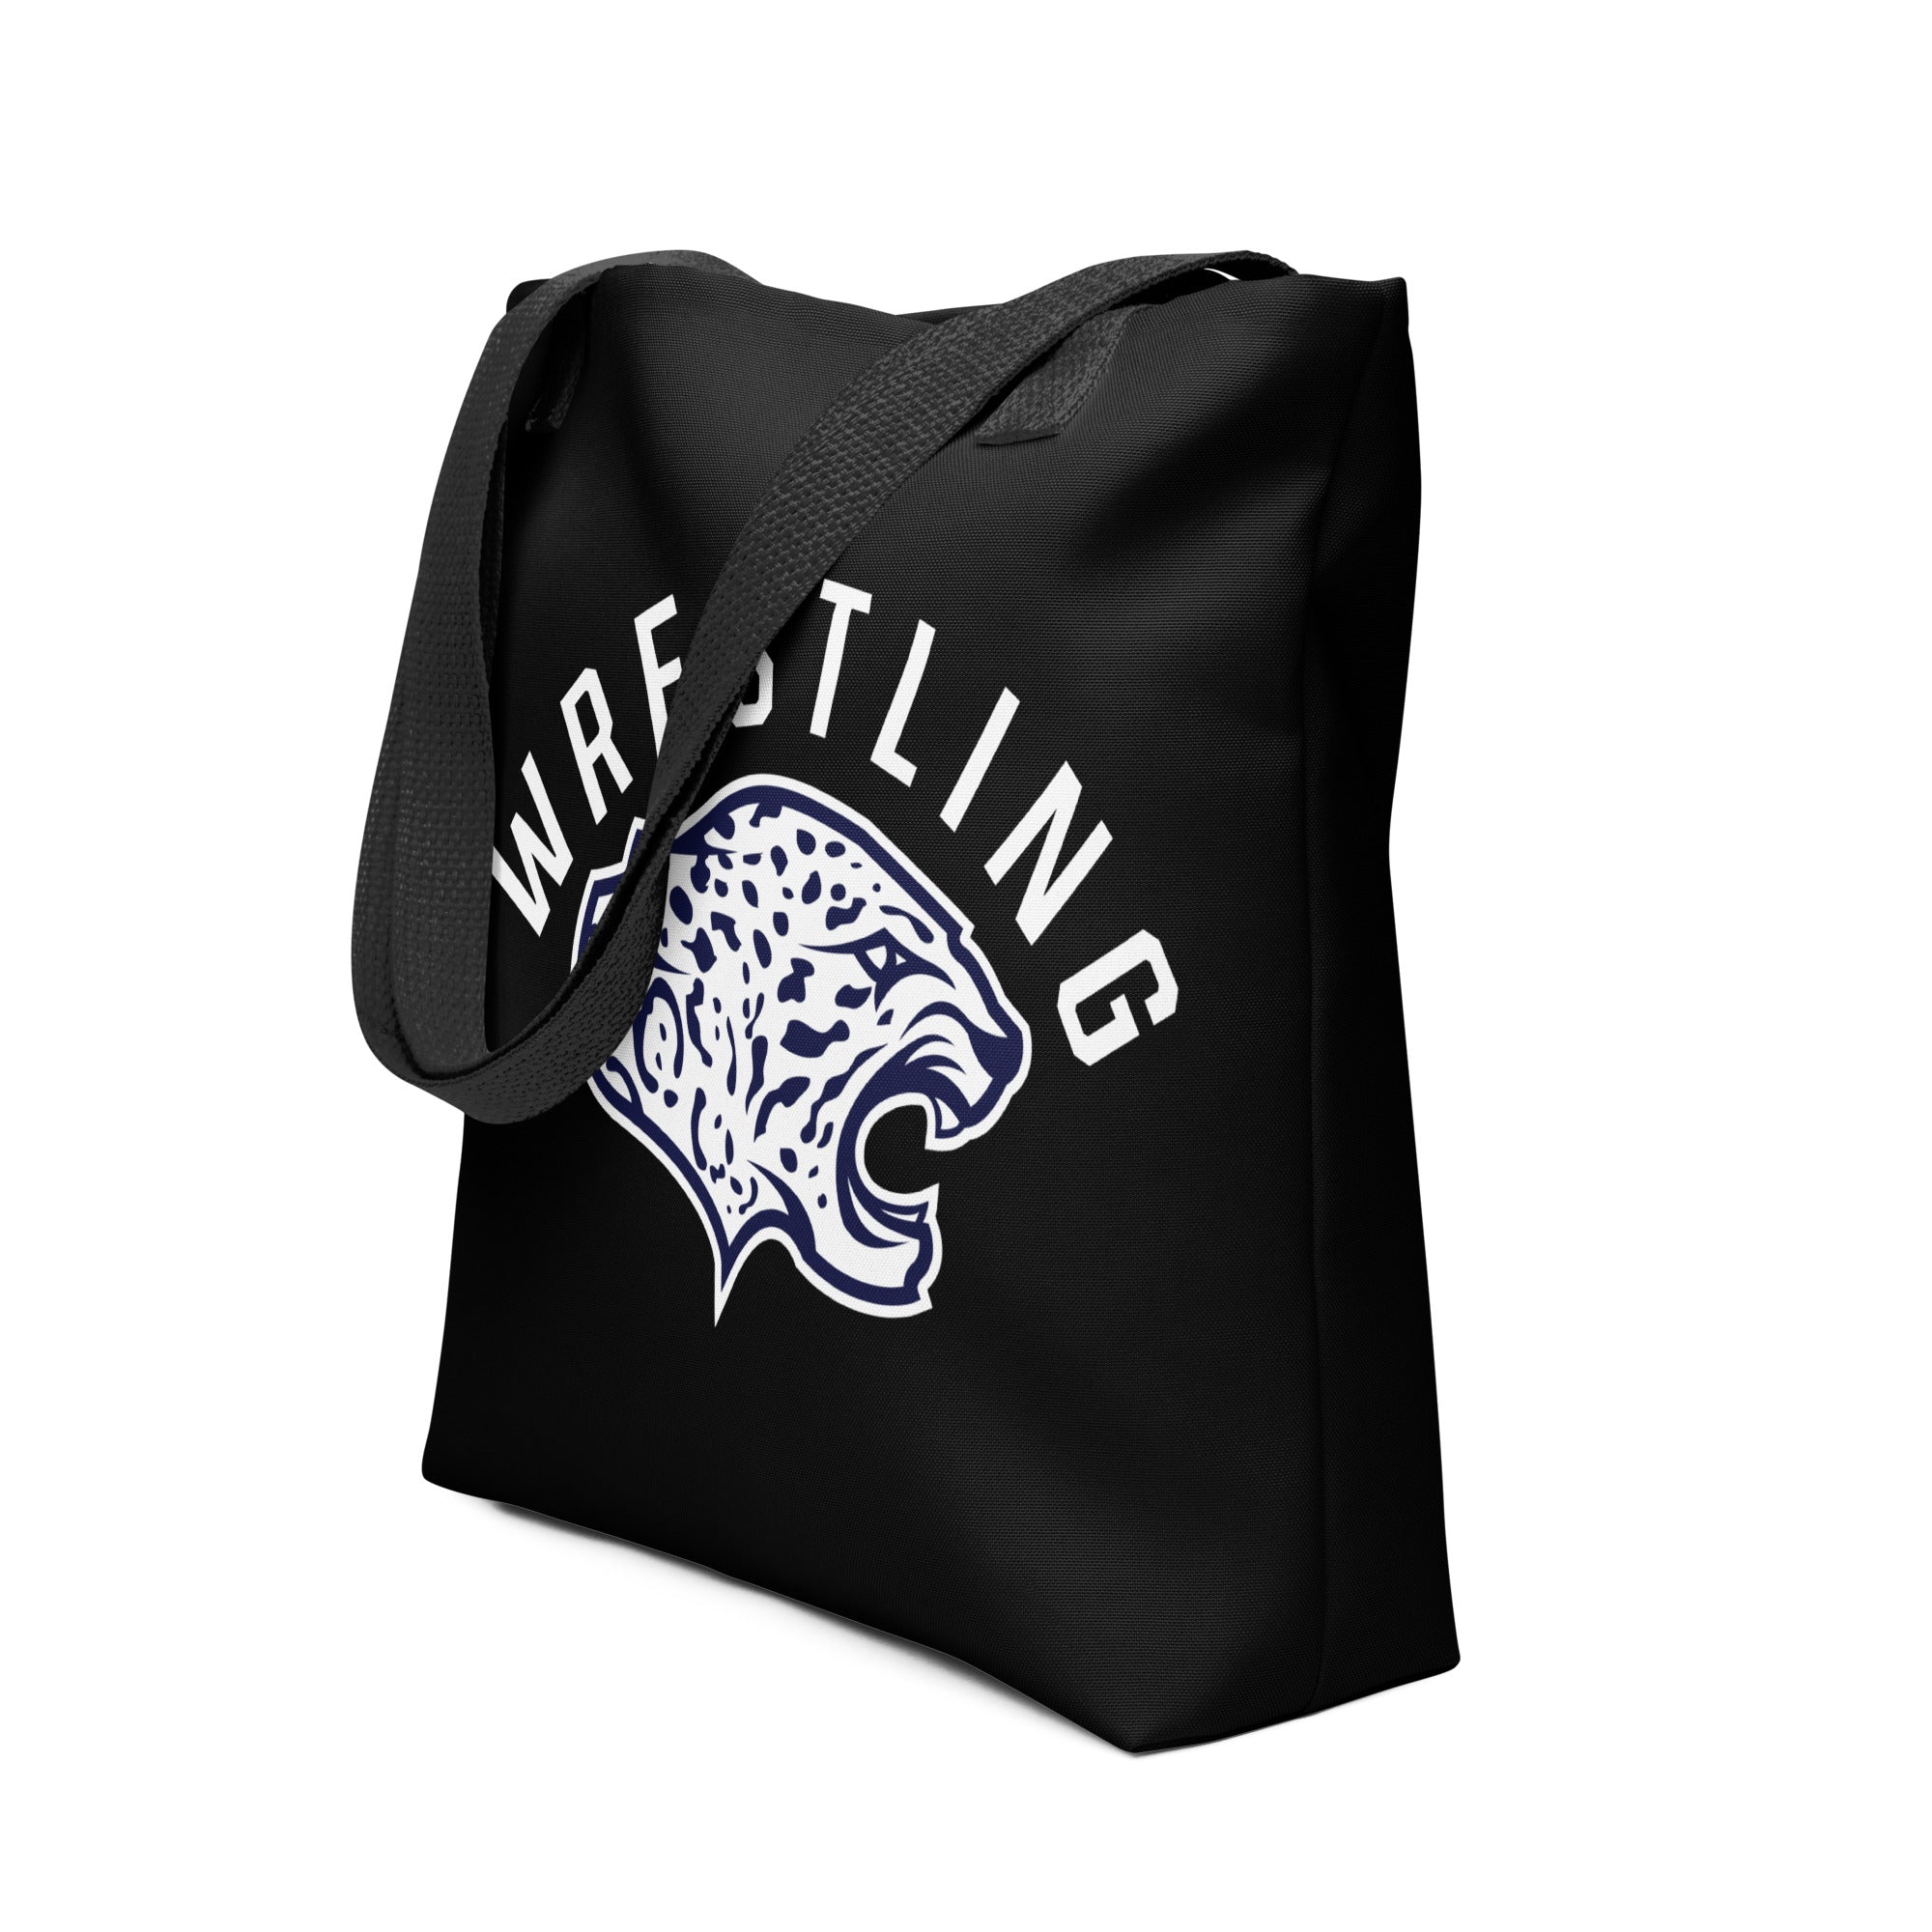 Mill Valley Wrestling All Over Print Tote